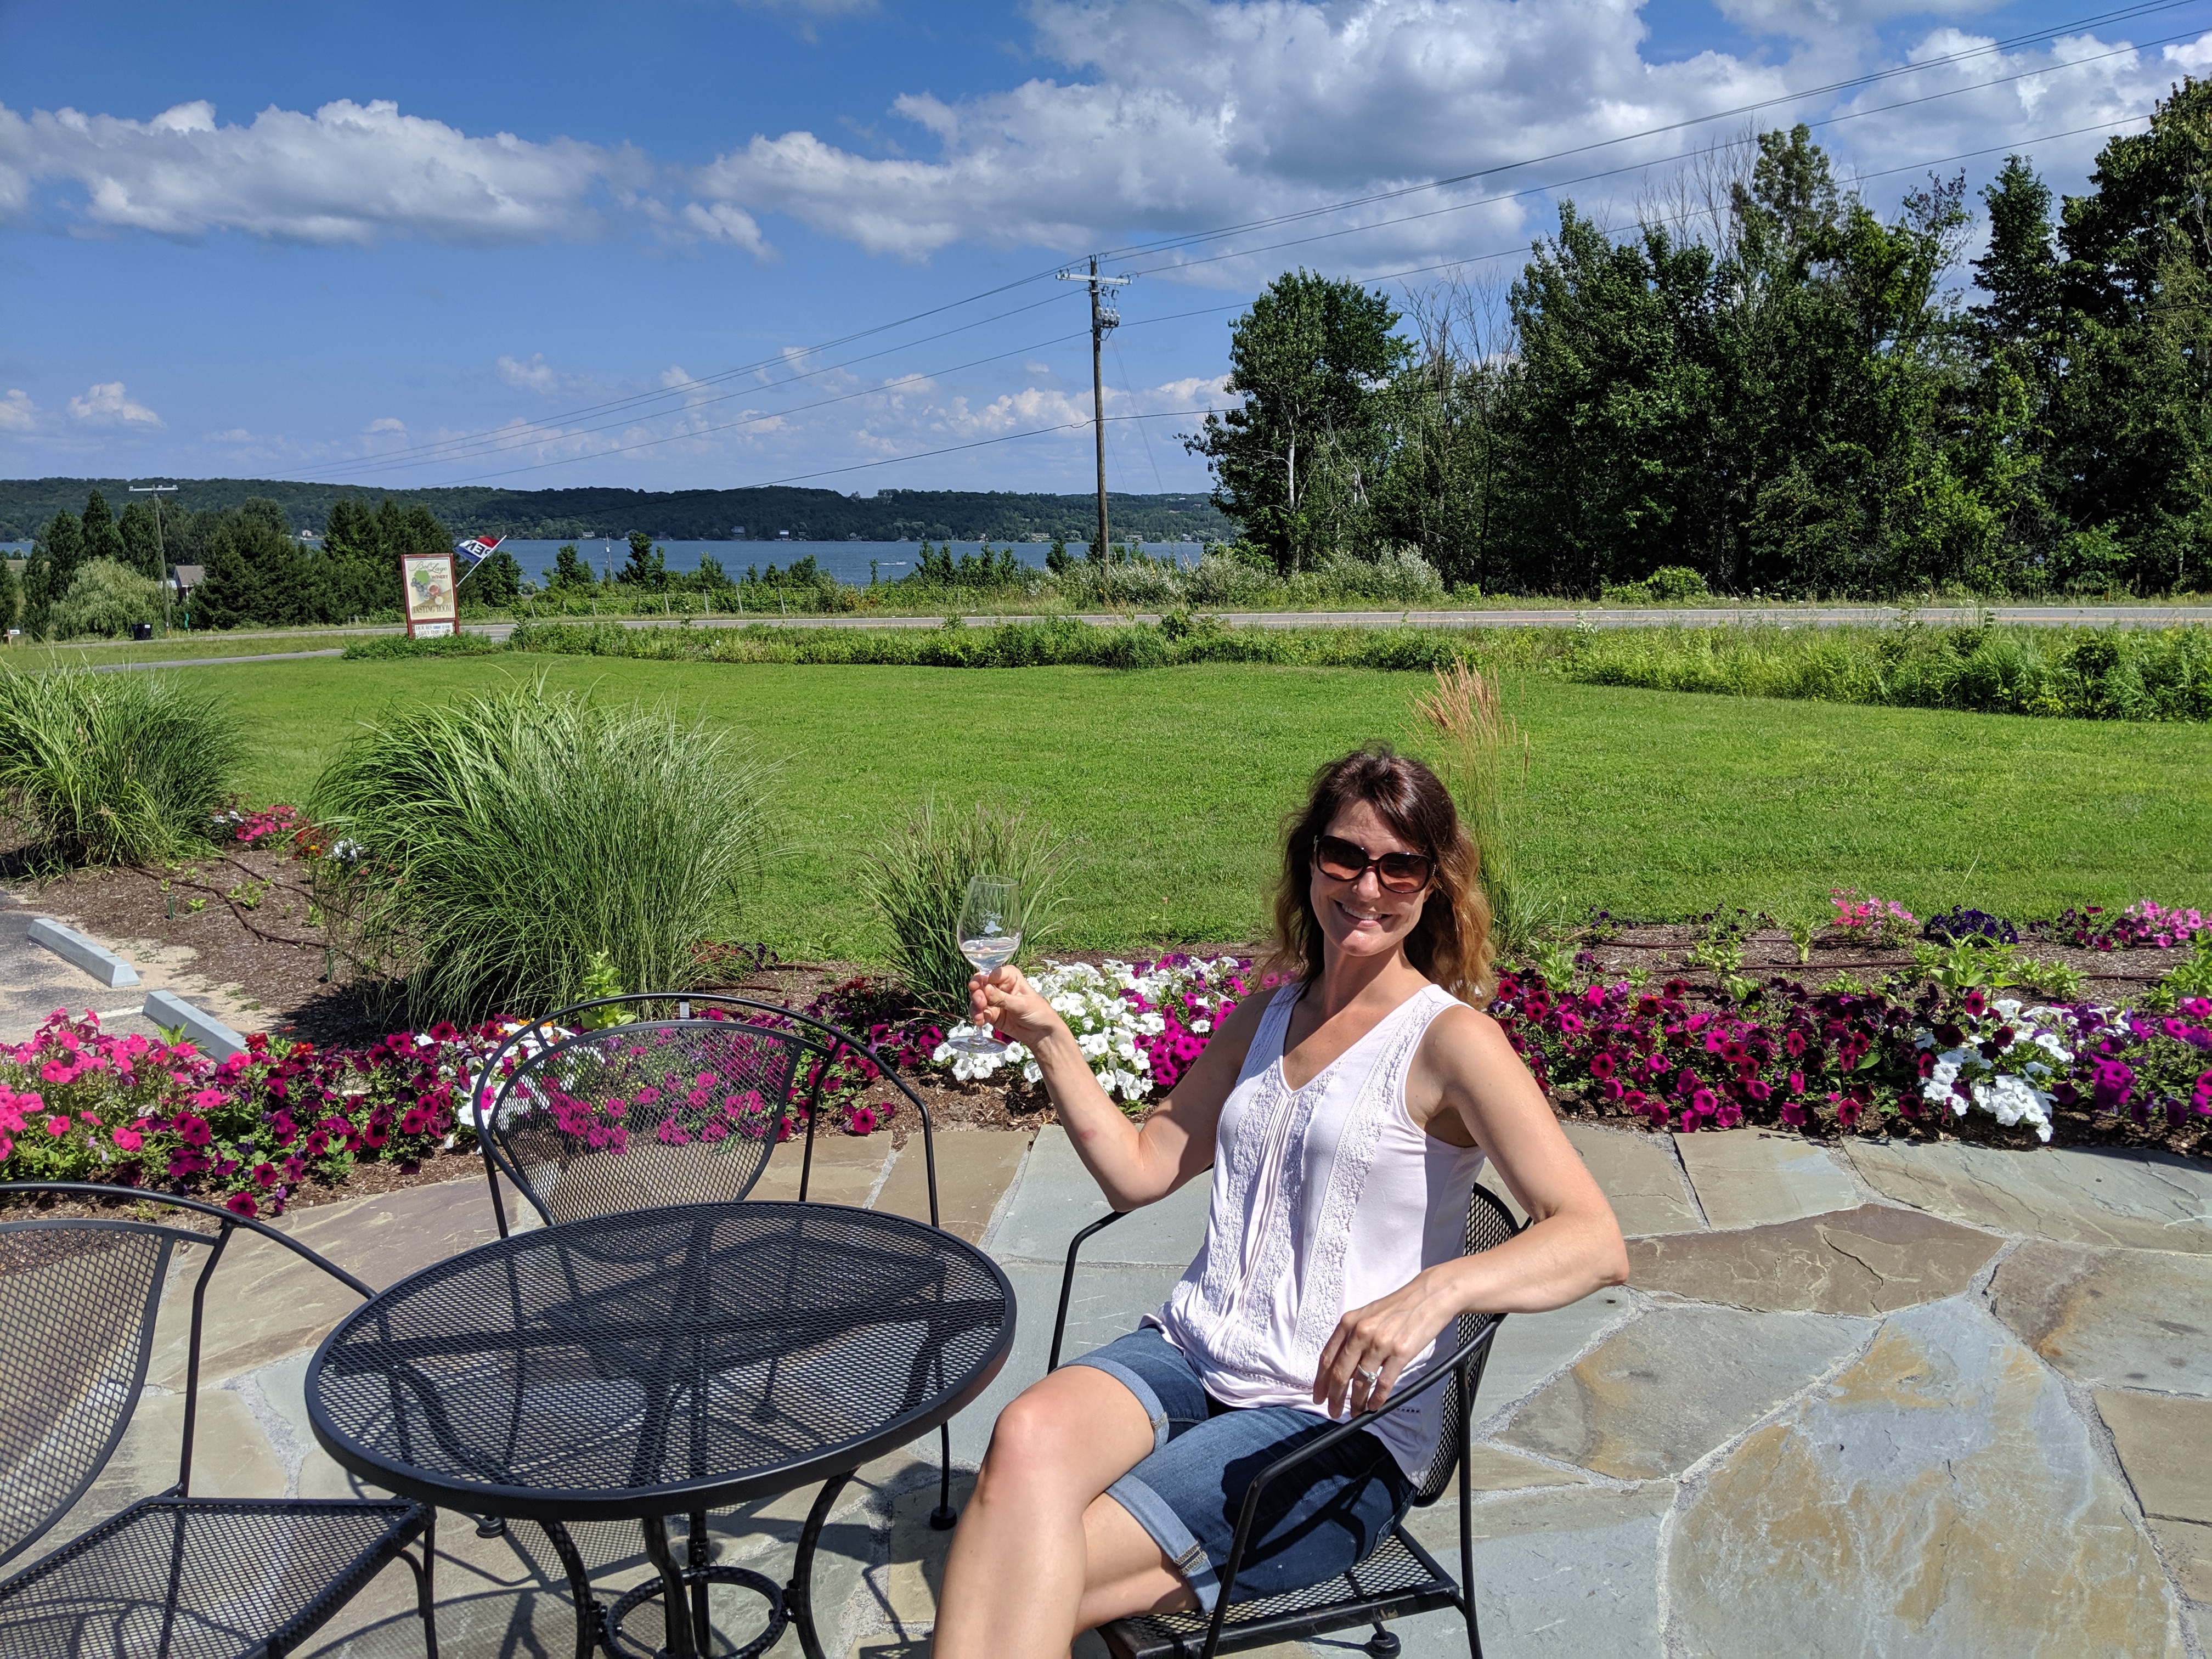 Stay awhile...enjoy a glass of wine on Bel Lago's Patio with stunning views of Lake Leelanau